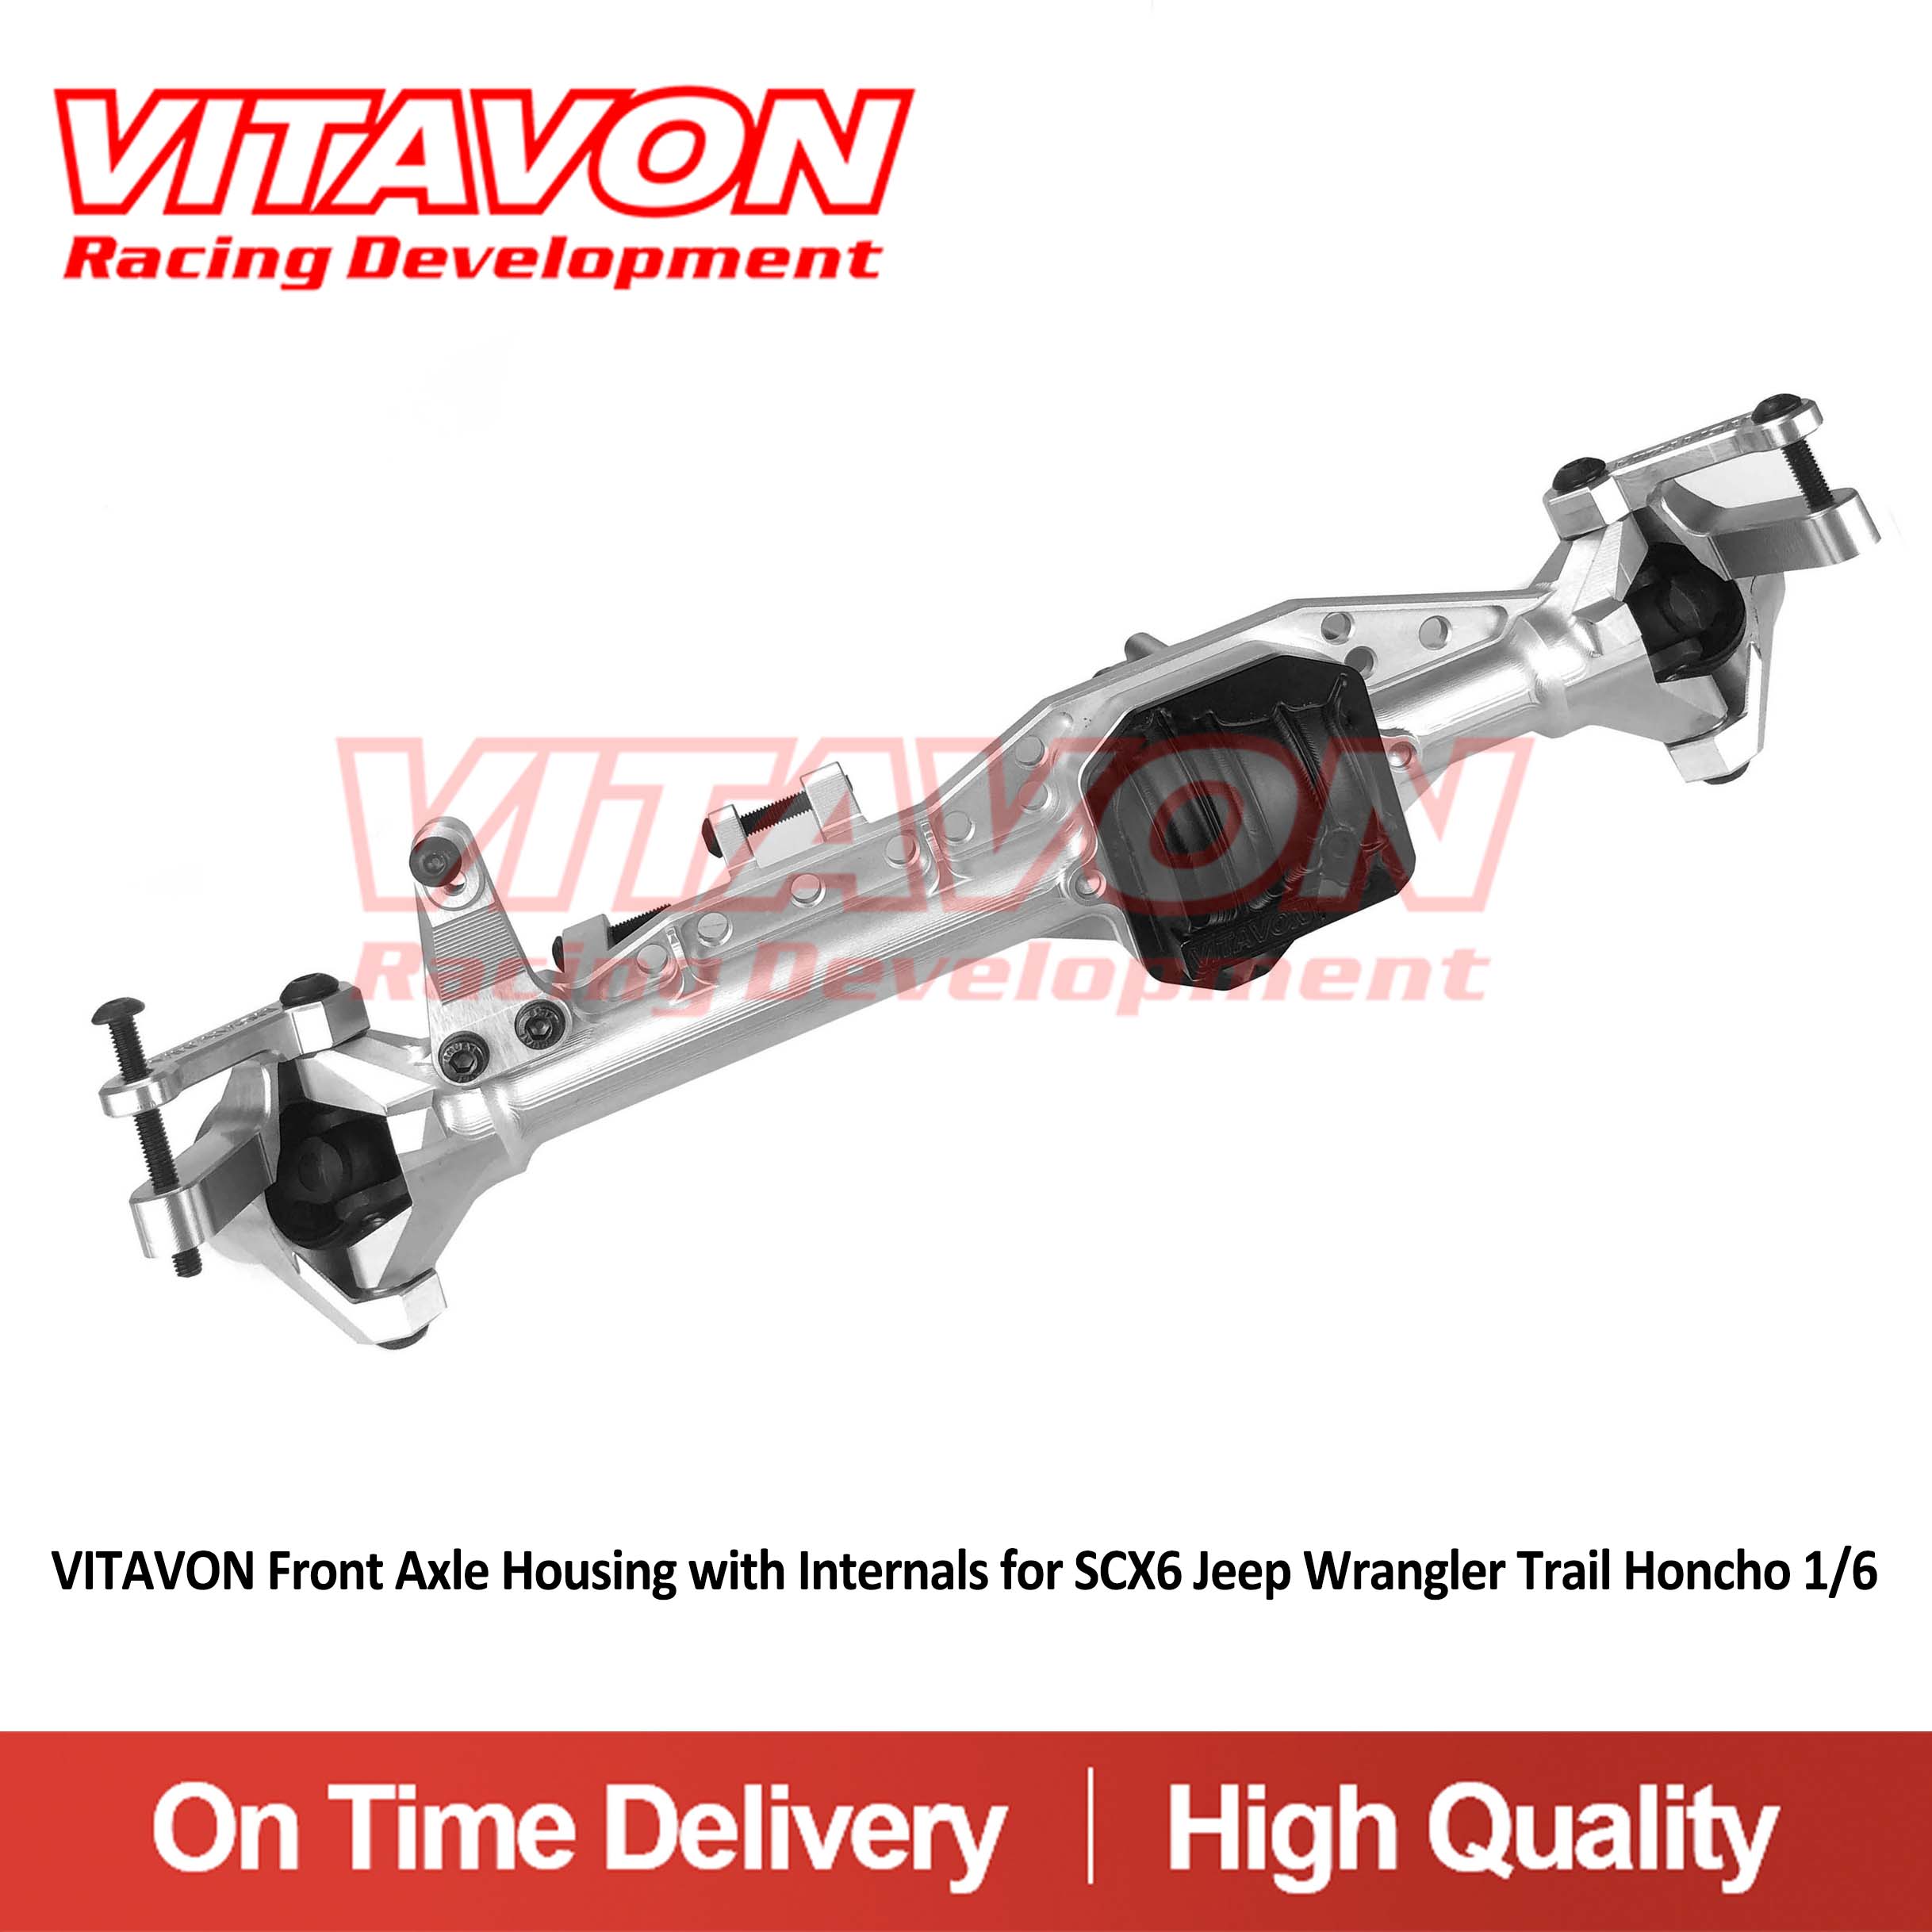 Vitavon Front Axle Housing with Internals for SCX6 Jeep Wrangler Trail Honcho 1/6